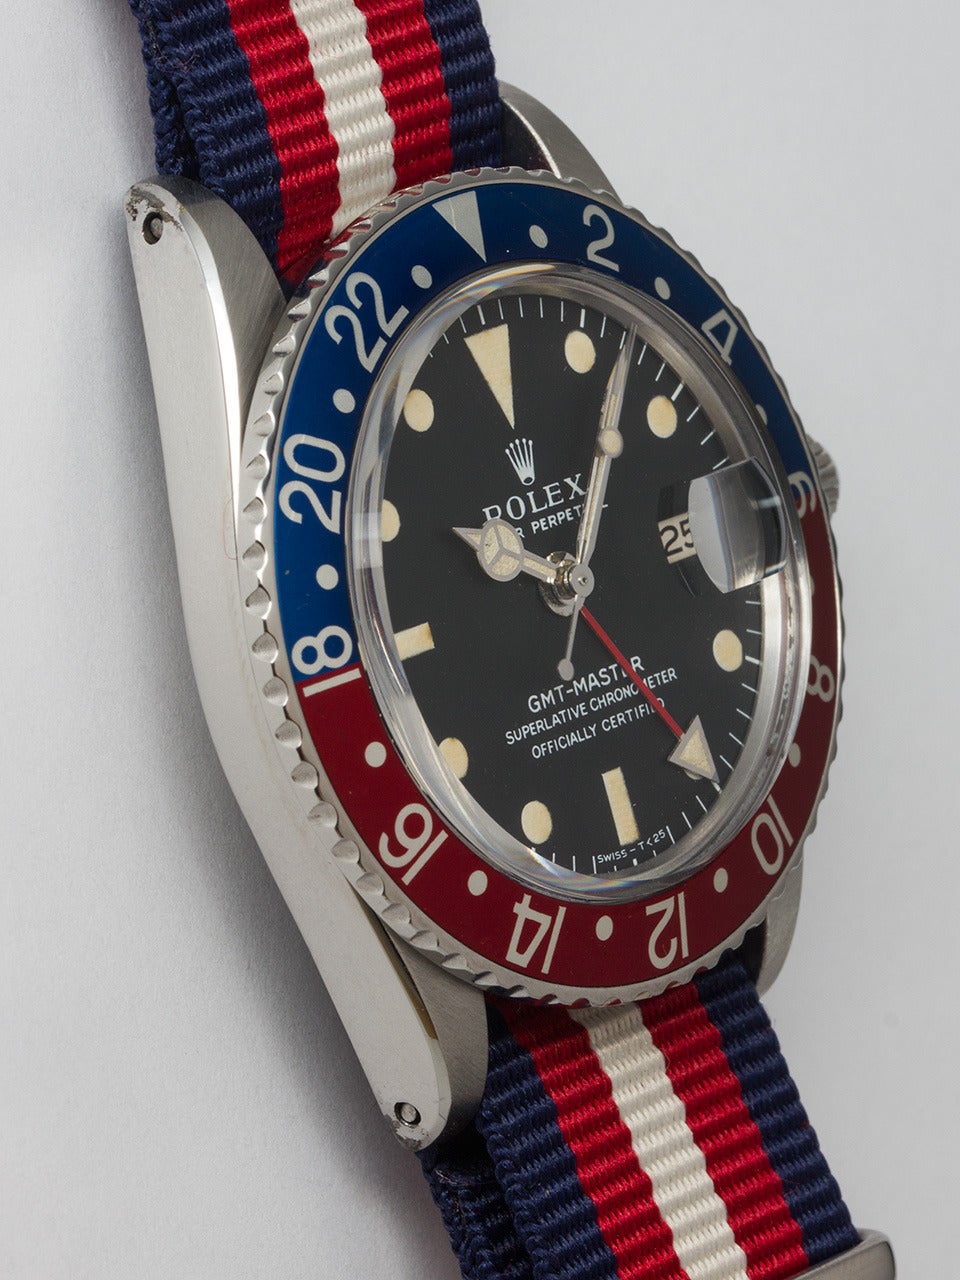 Rolex Stainless Steel GMT-Master Wristwatch, ref 1675 serial # 2.9 million circa 1971. 40mm diameter case featuring red and blue, so called Pepsi bezel and acrylic crystal. Original matte black dial with light ivory luminous indexes and matching